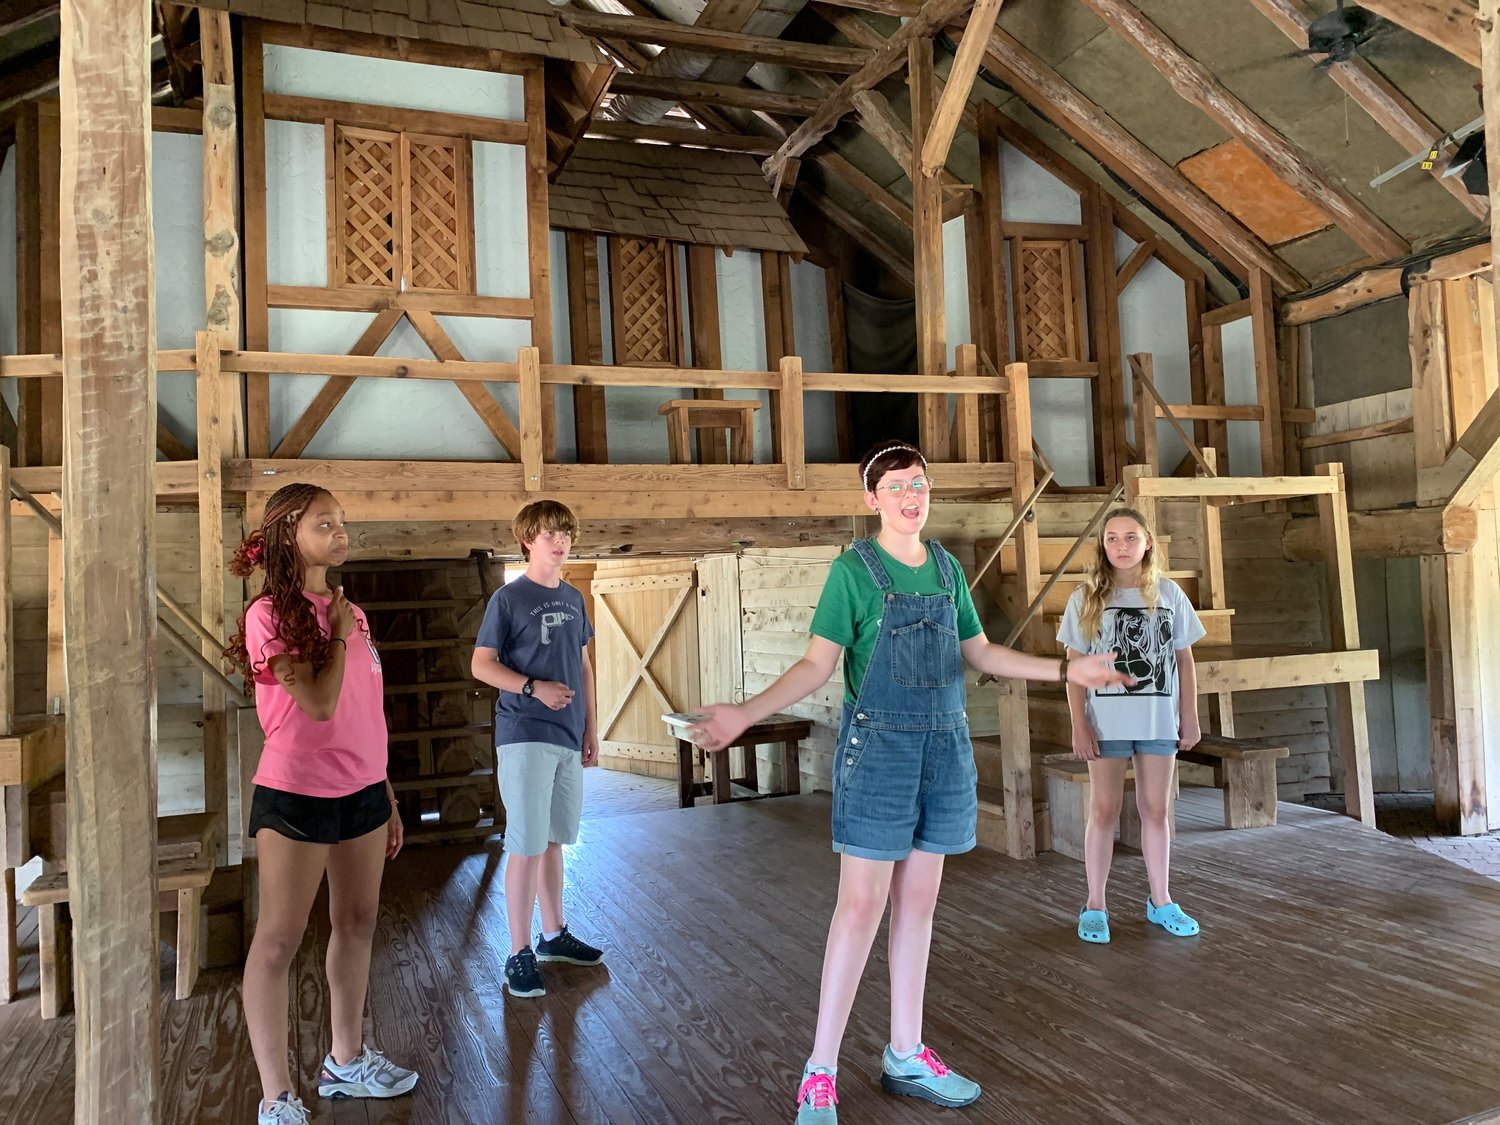 Gonzales resident Lena Salazar, front, works on a scene from “As You Like It” with other Camp Shakespeare castmates in the Winedale Theatre barn. Camp Shakespeare’s first 2022 performance of the comedy will be at the Crystal Theatre in Gonzales this Friday, June 24, at 3:30 p.m.